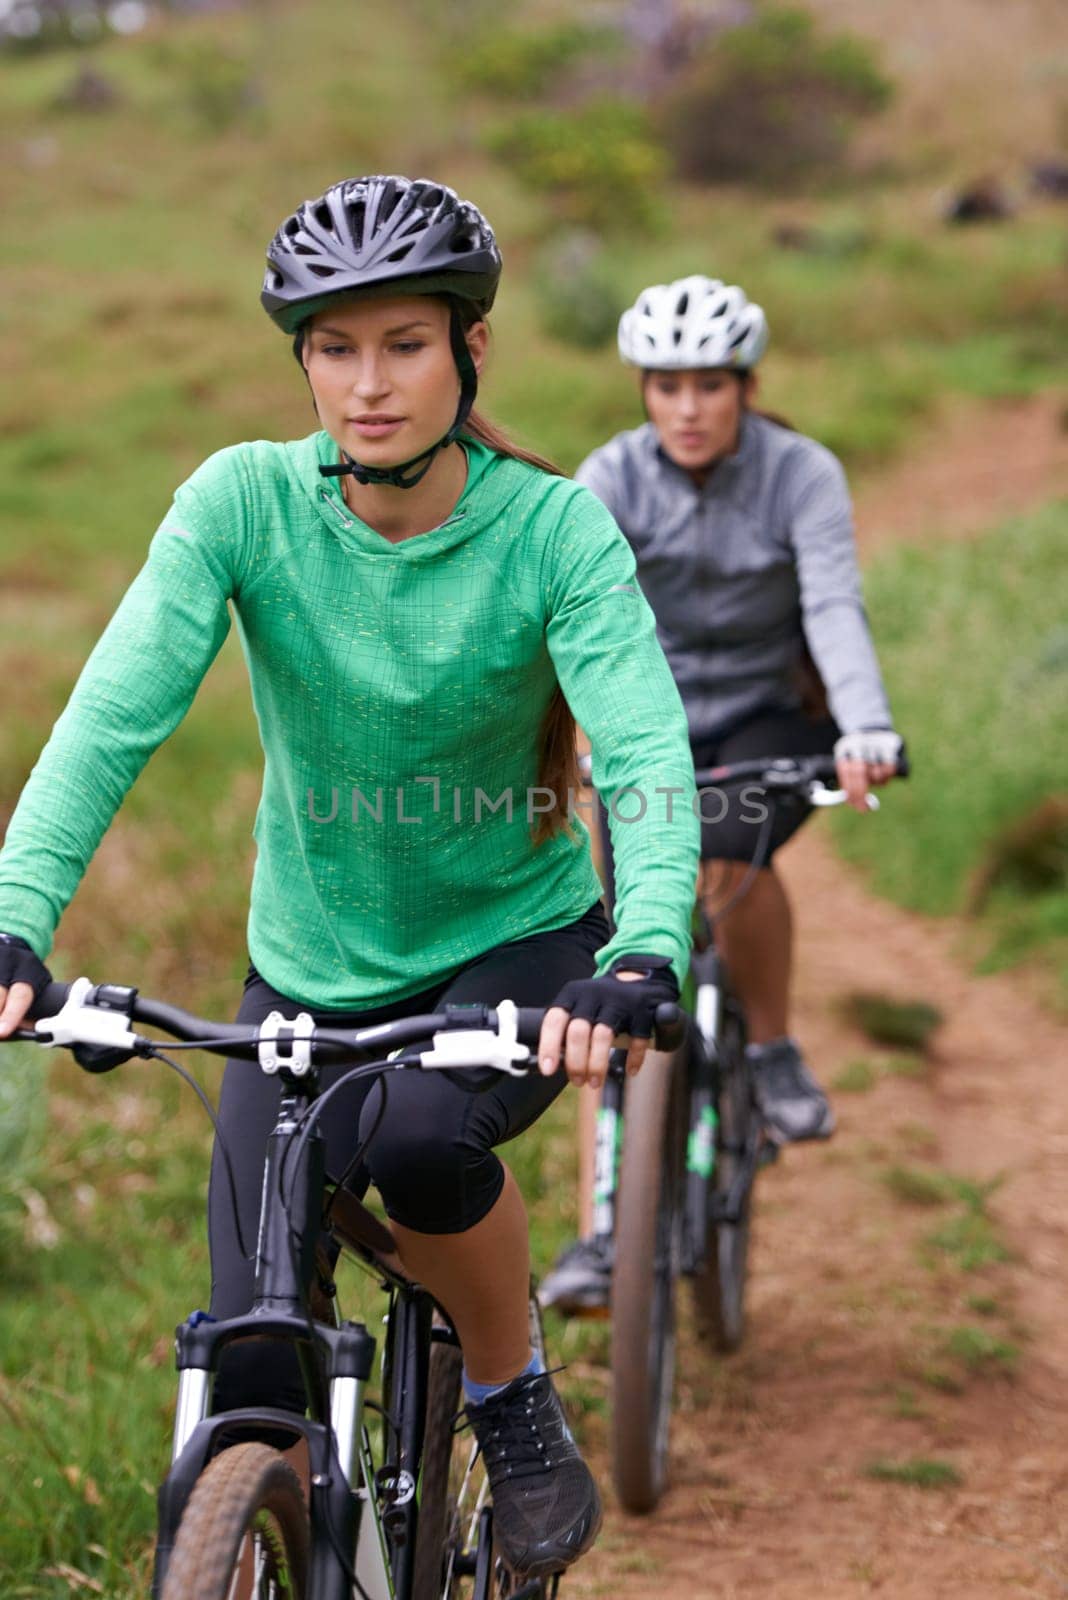 Woman, friends and cycling in nature on bicycle for fitness, cycling or off road travel on trail or path. Female person, biker or cyclist in forest for outdoor workout, training or sports exercise.